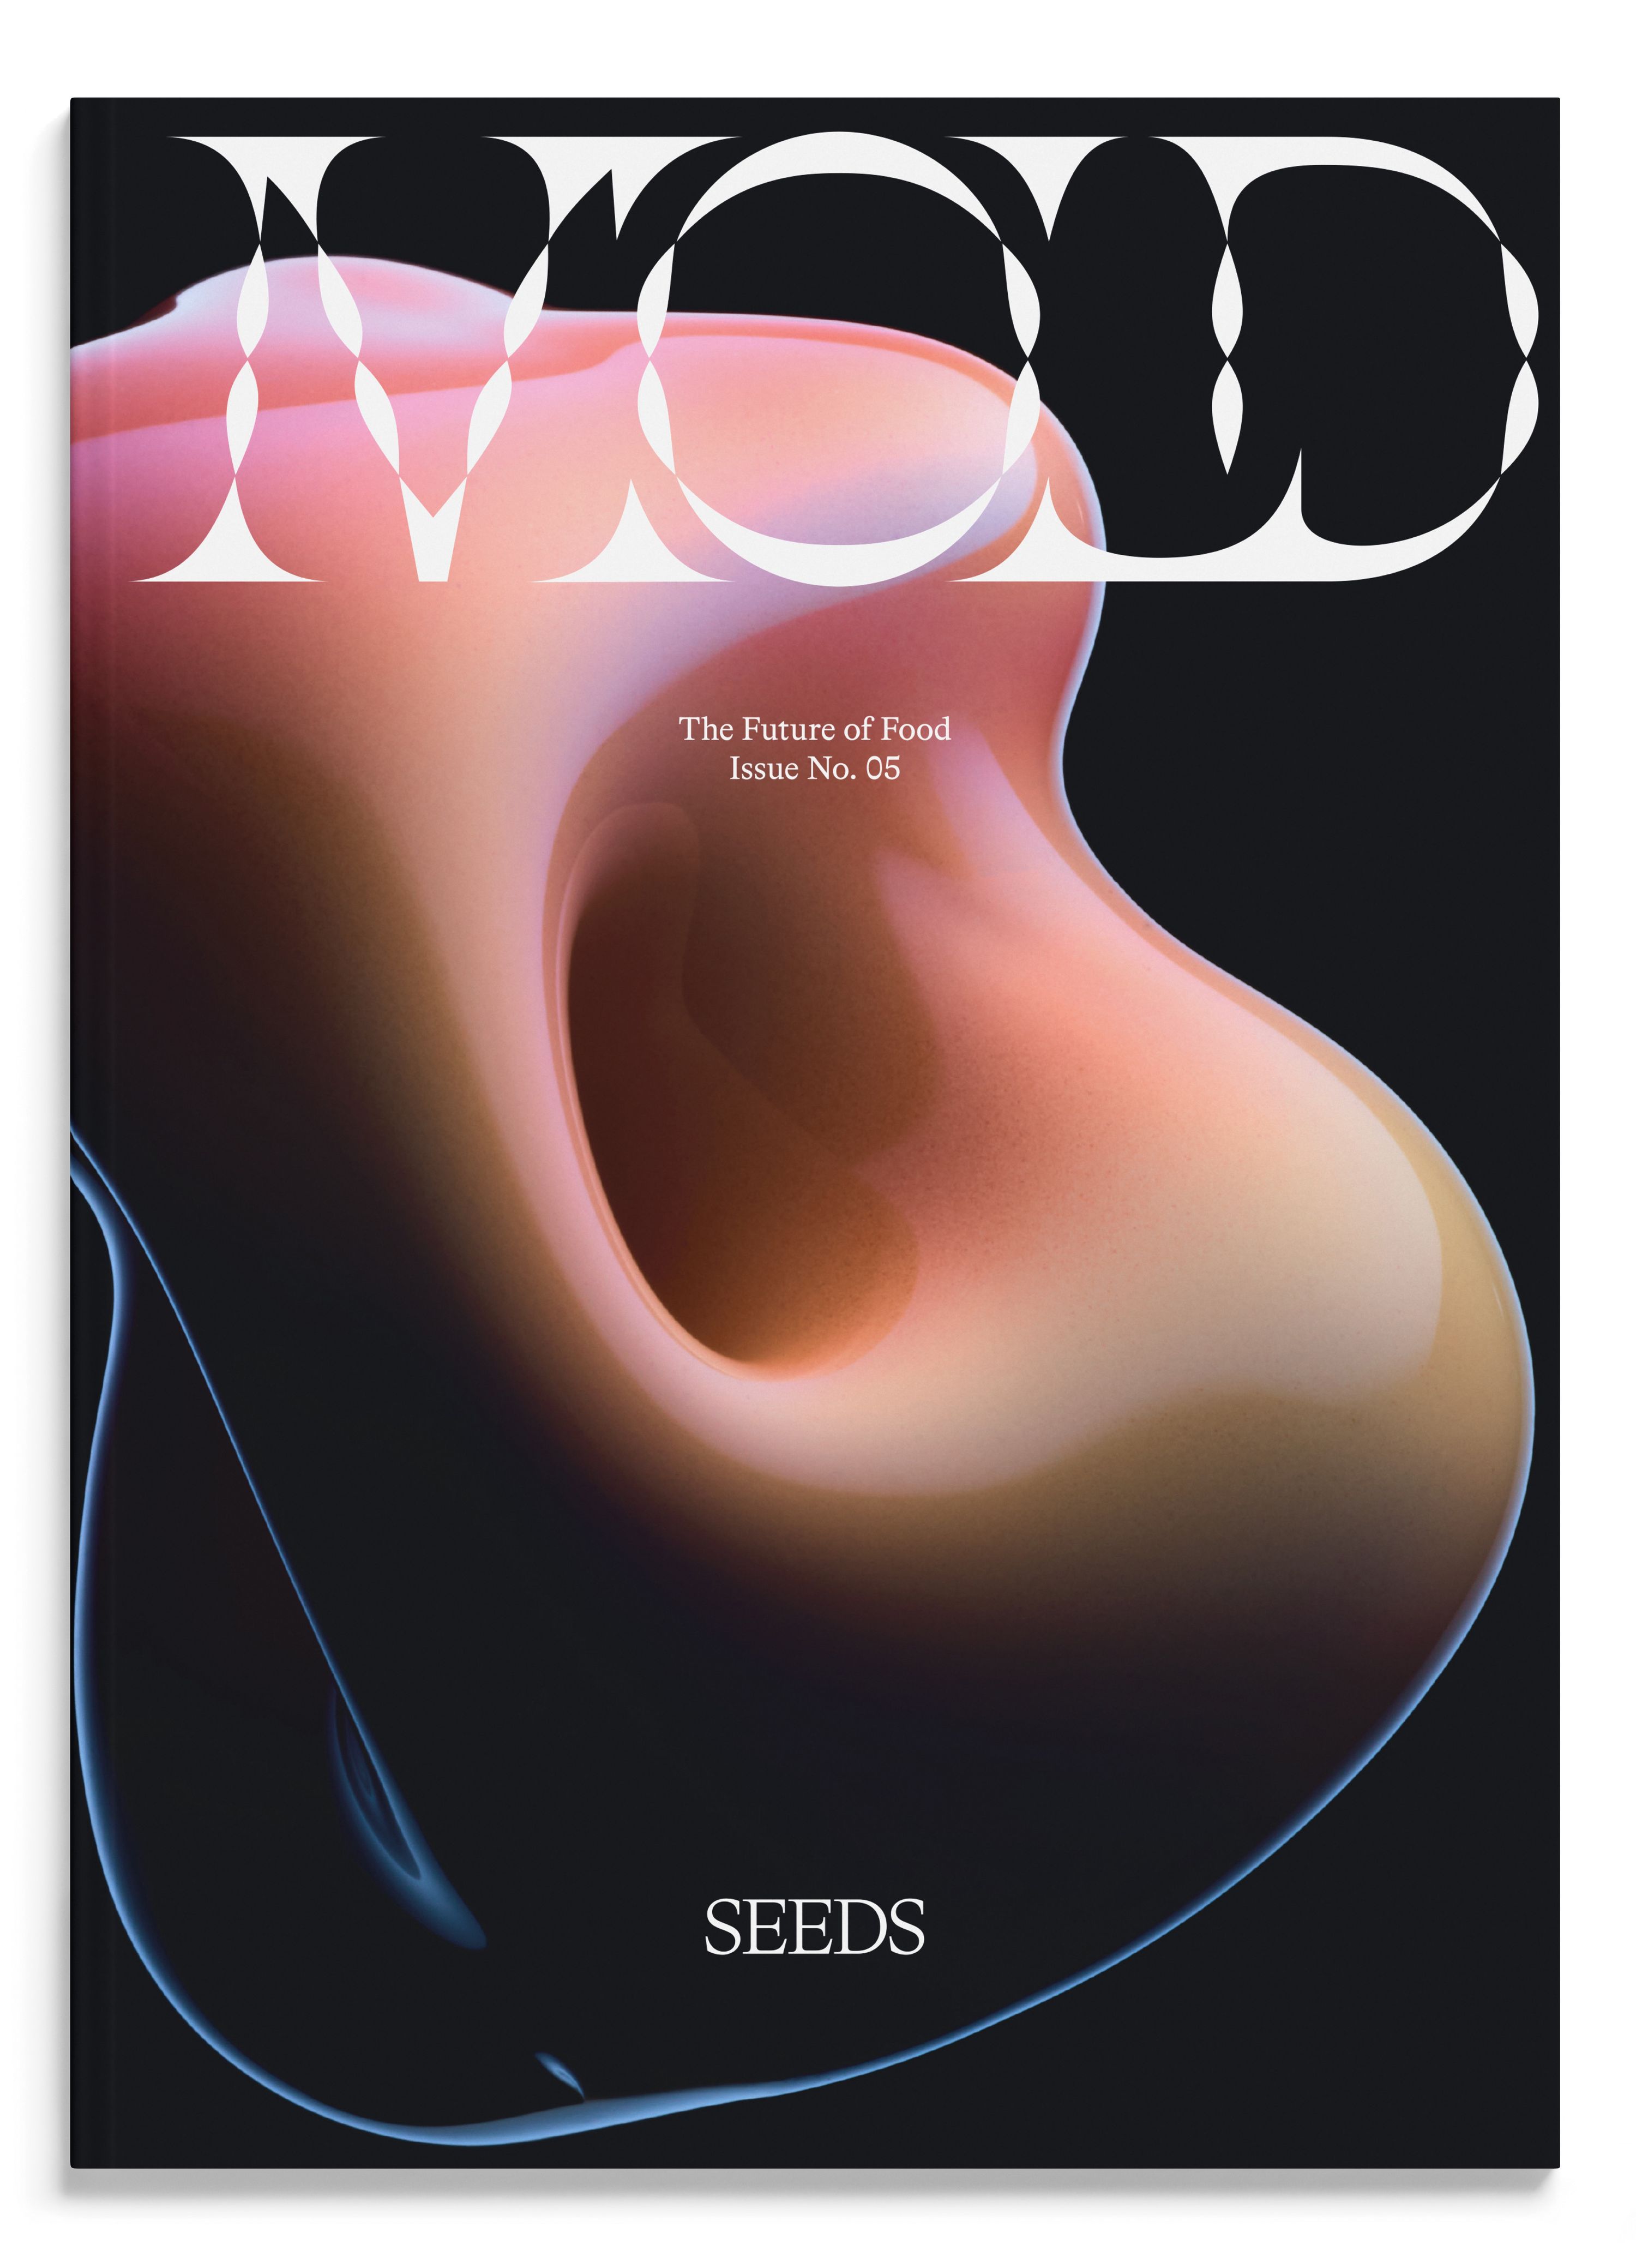 A blob on a magazine cover.